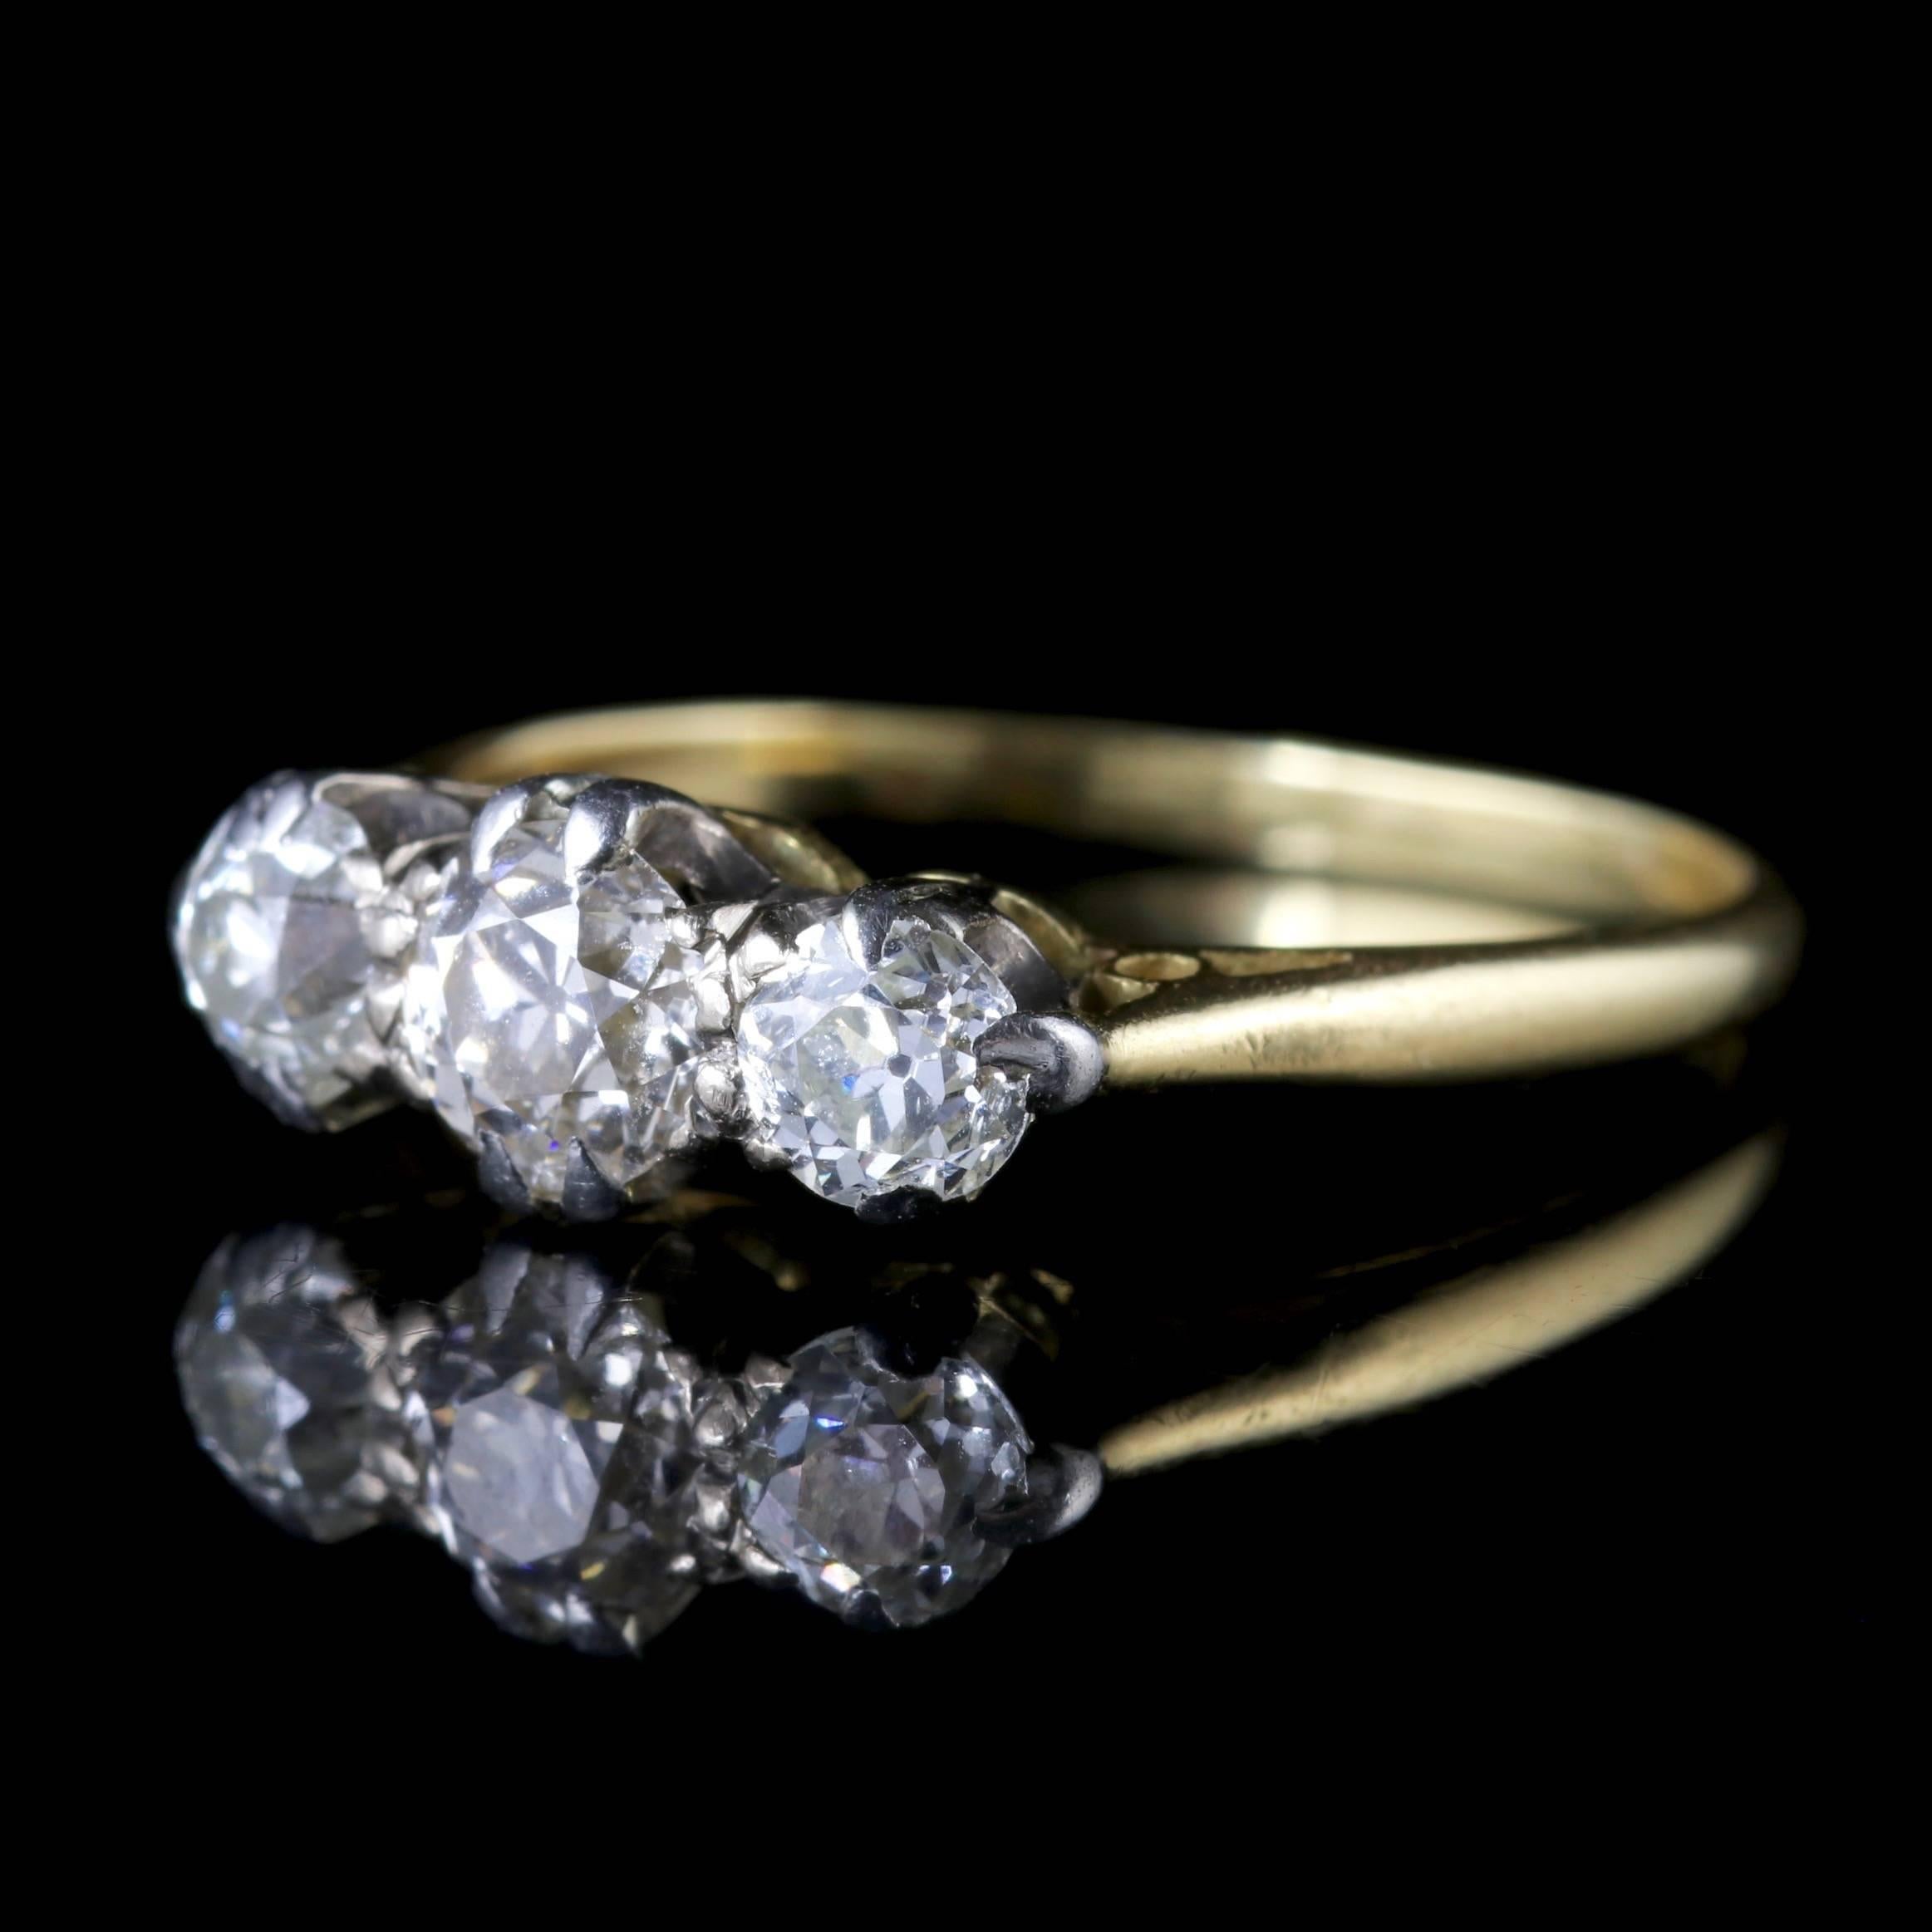 To read more please click continue reading below-

This fabulous antique 18ct Gold, Diamond trilogy ring is Edwardian Circa 1915. 

A Trilogy of stones represents past, present and future, or those 3 little words ‘I - love - you’.

The central